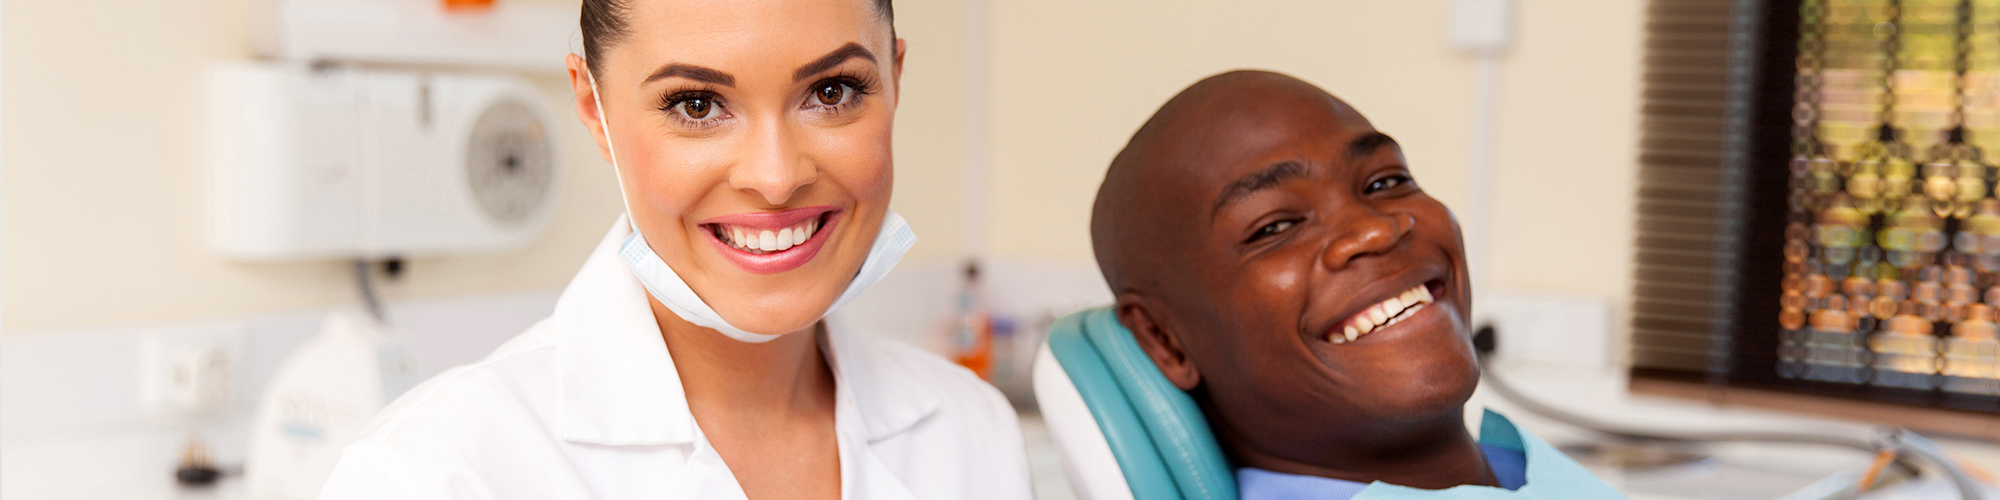 Dentist Smiling with Patient in Goldsboro, NC